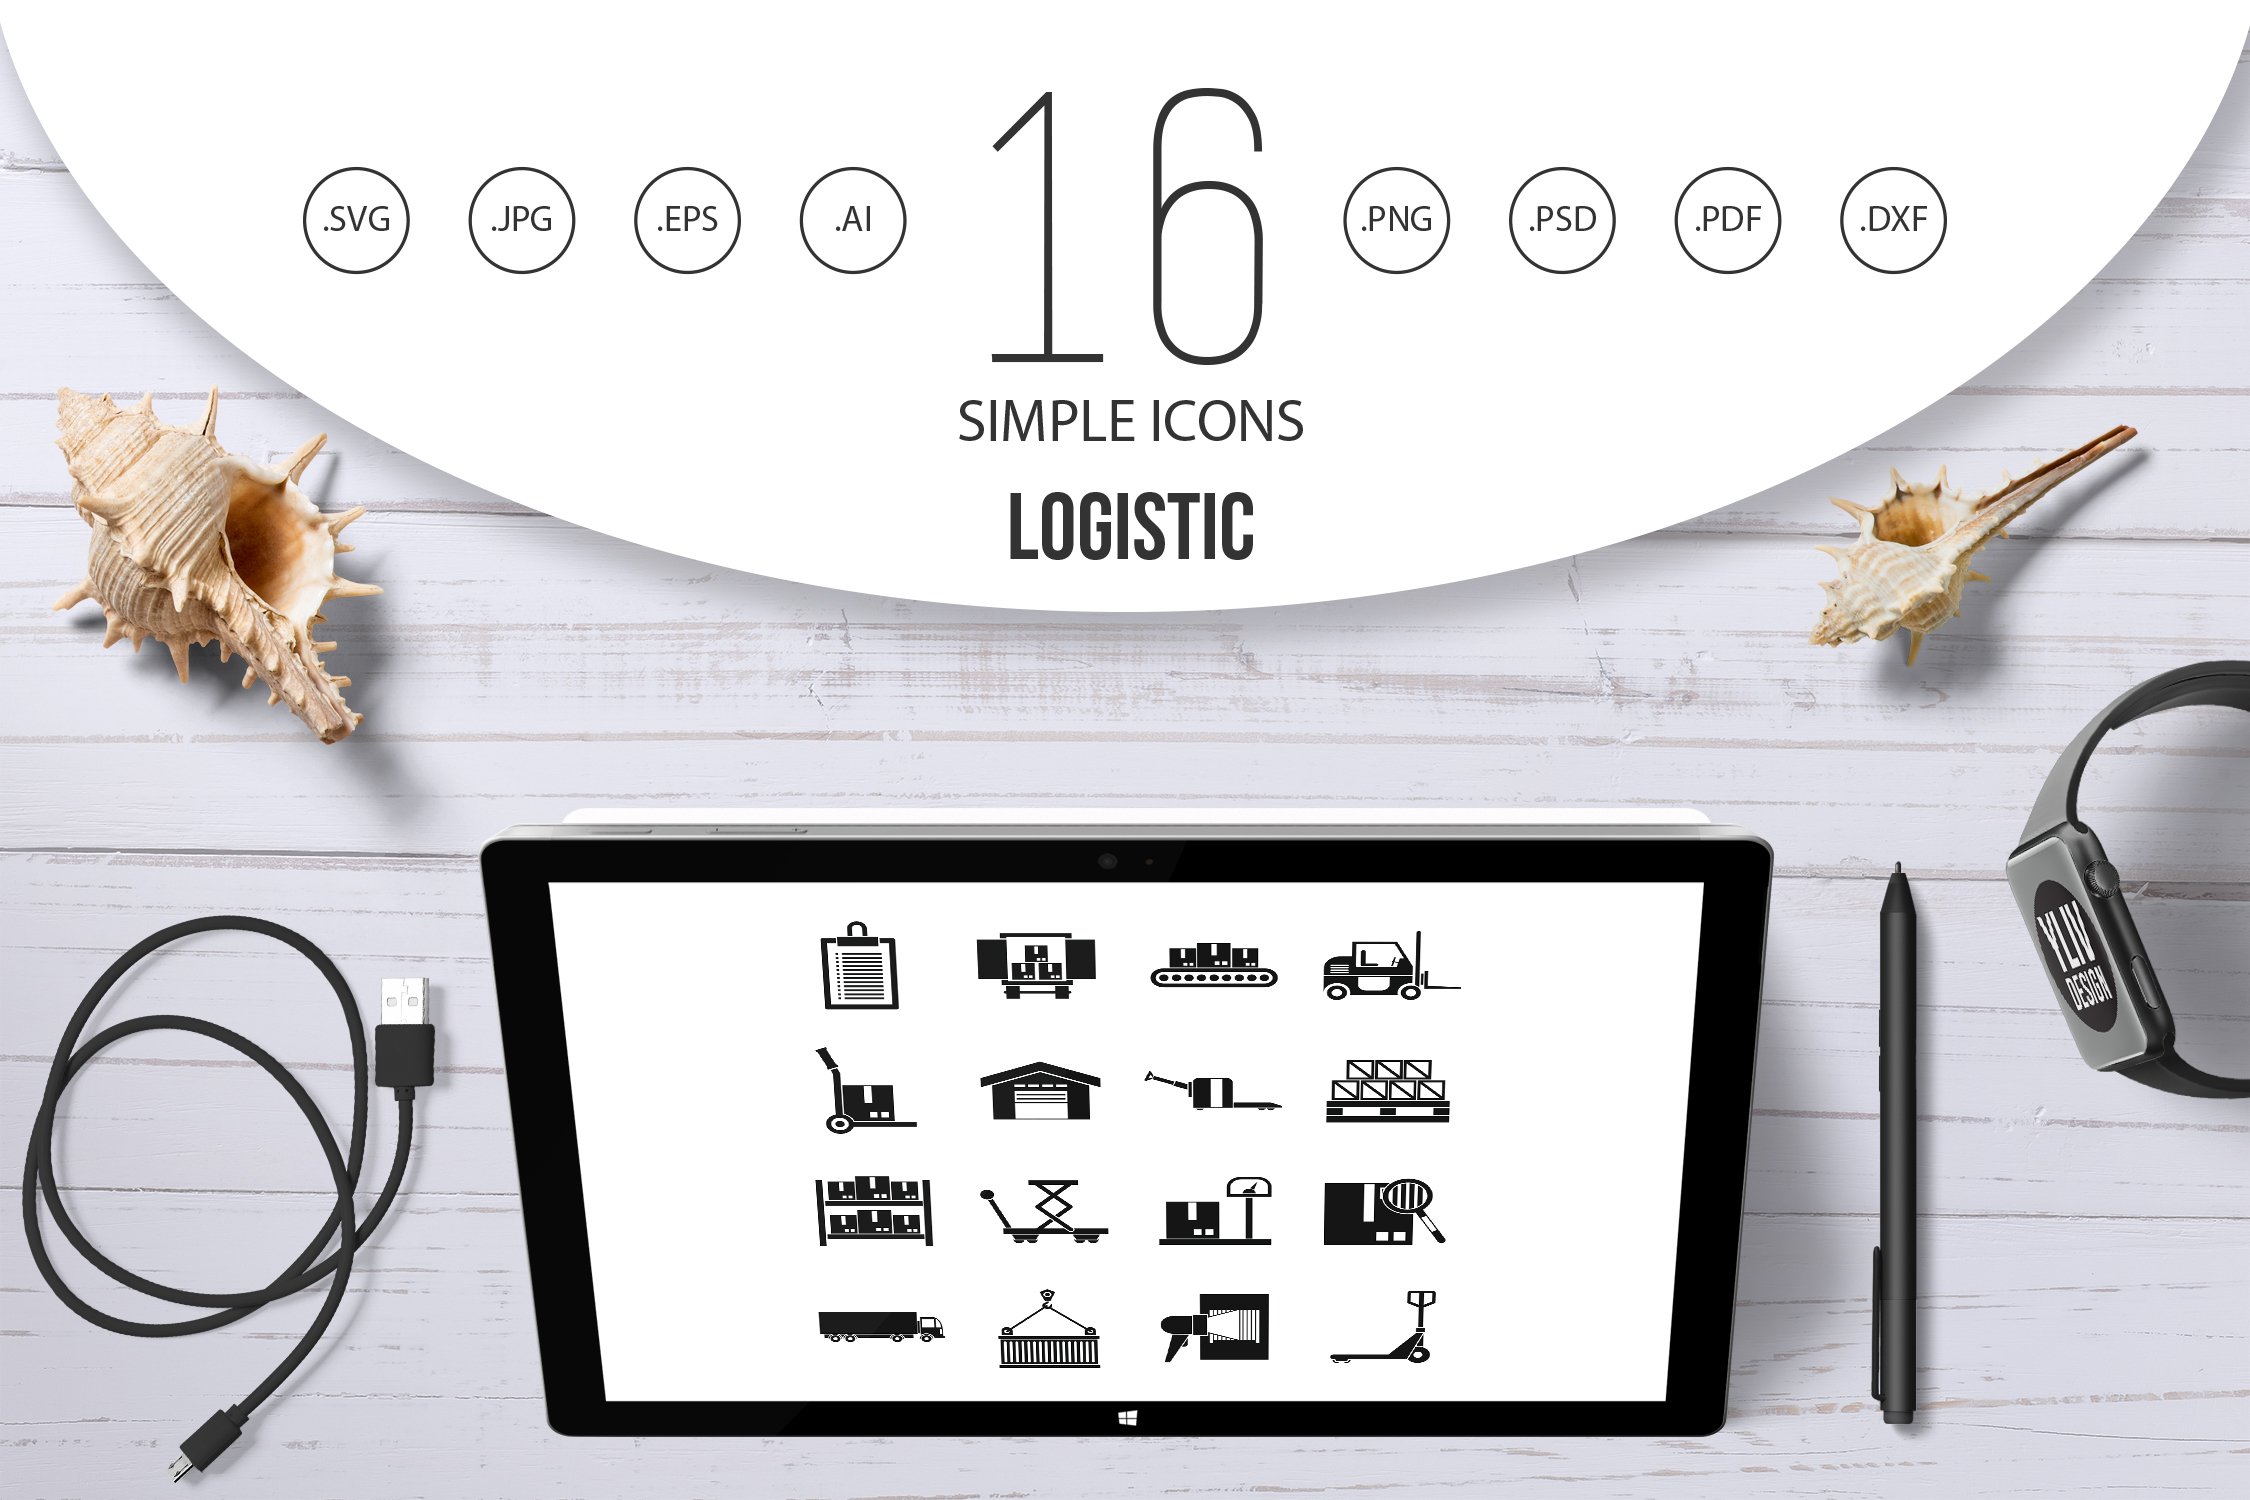 Logistic icons set, simple style cover image.